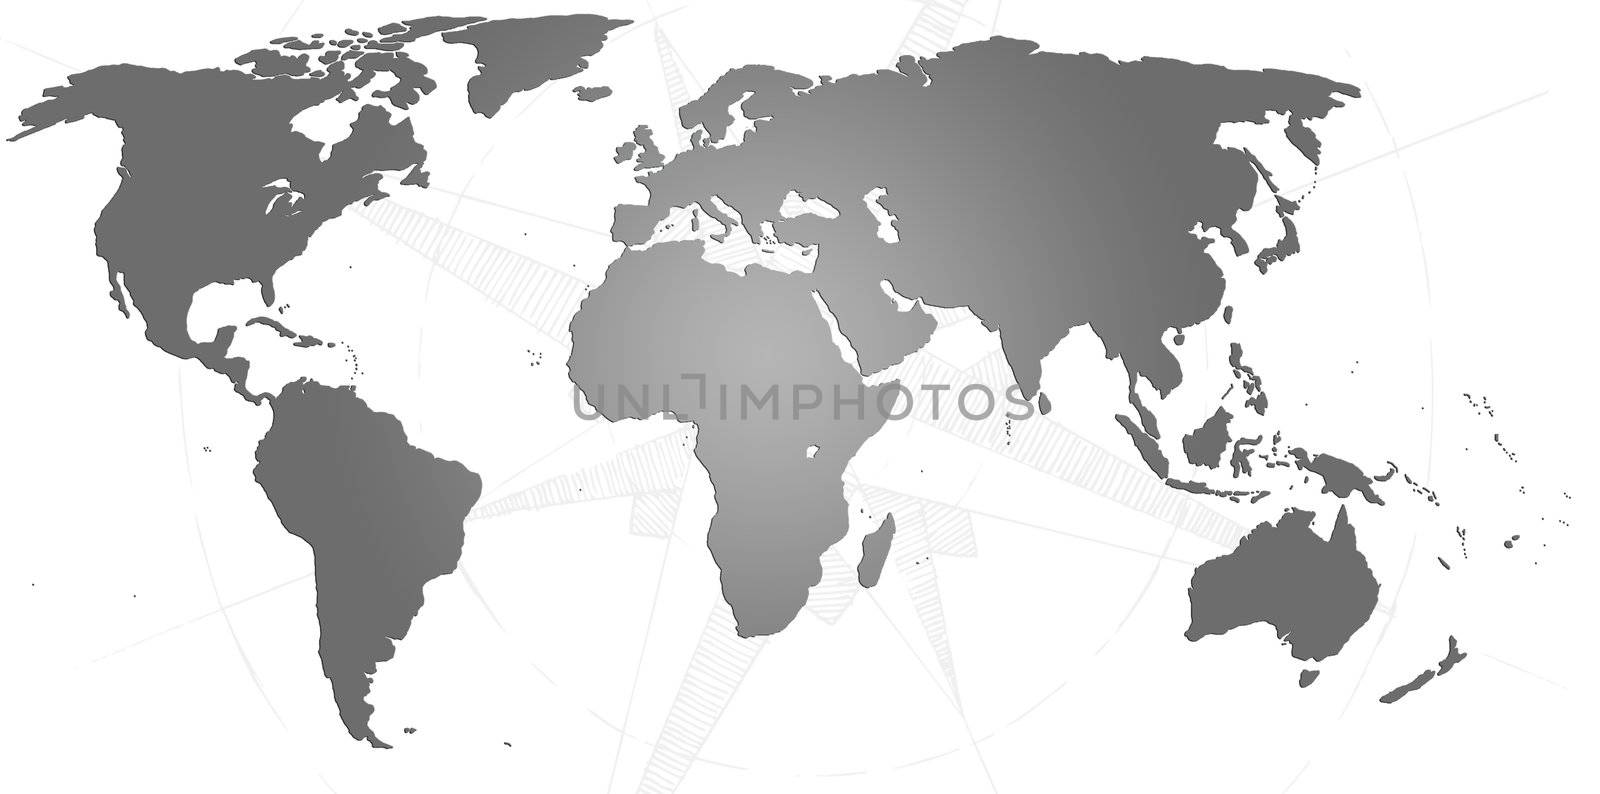 World map in black and white with a compass behind
